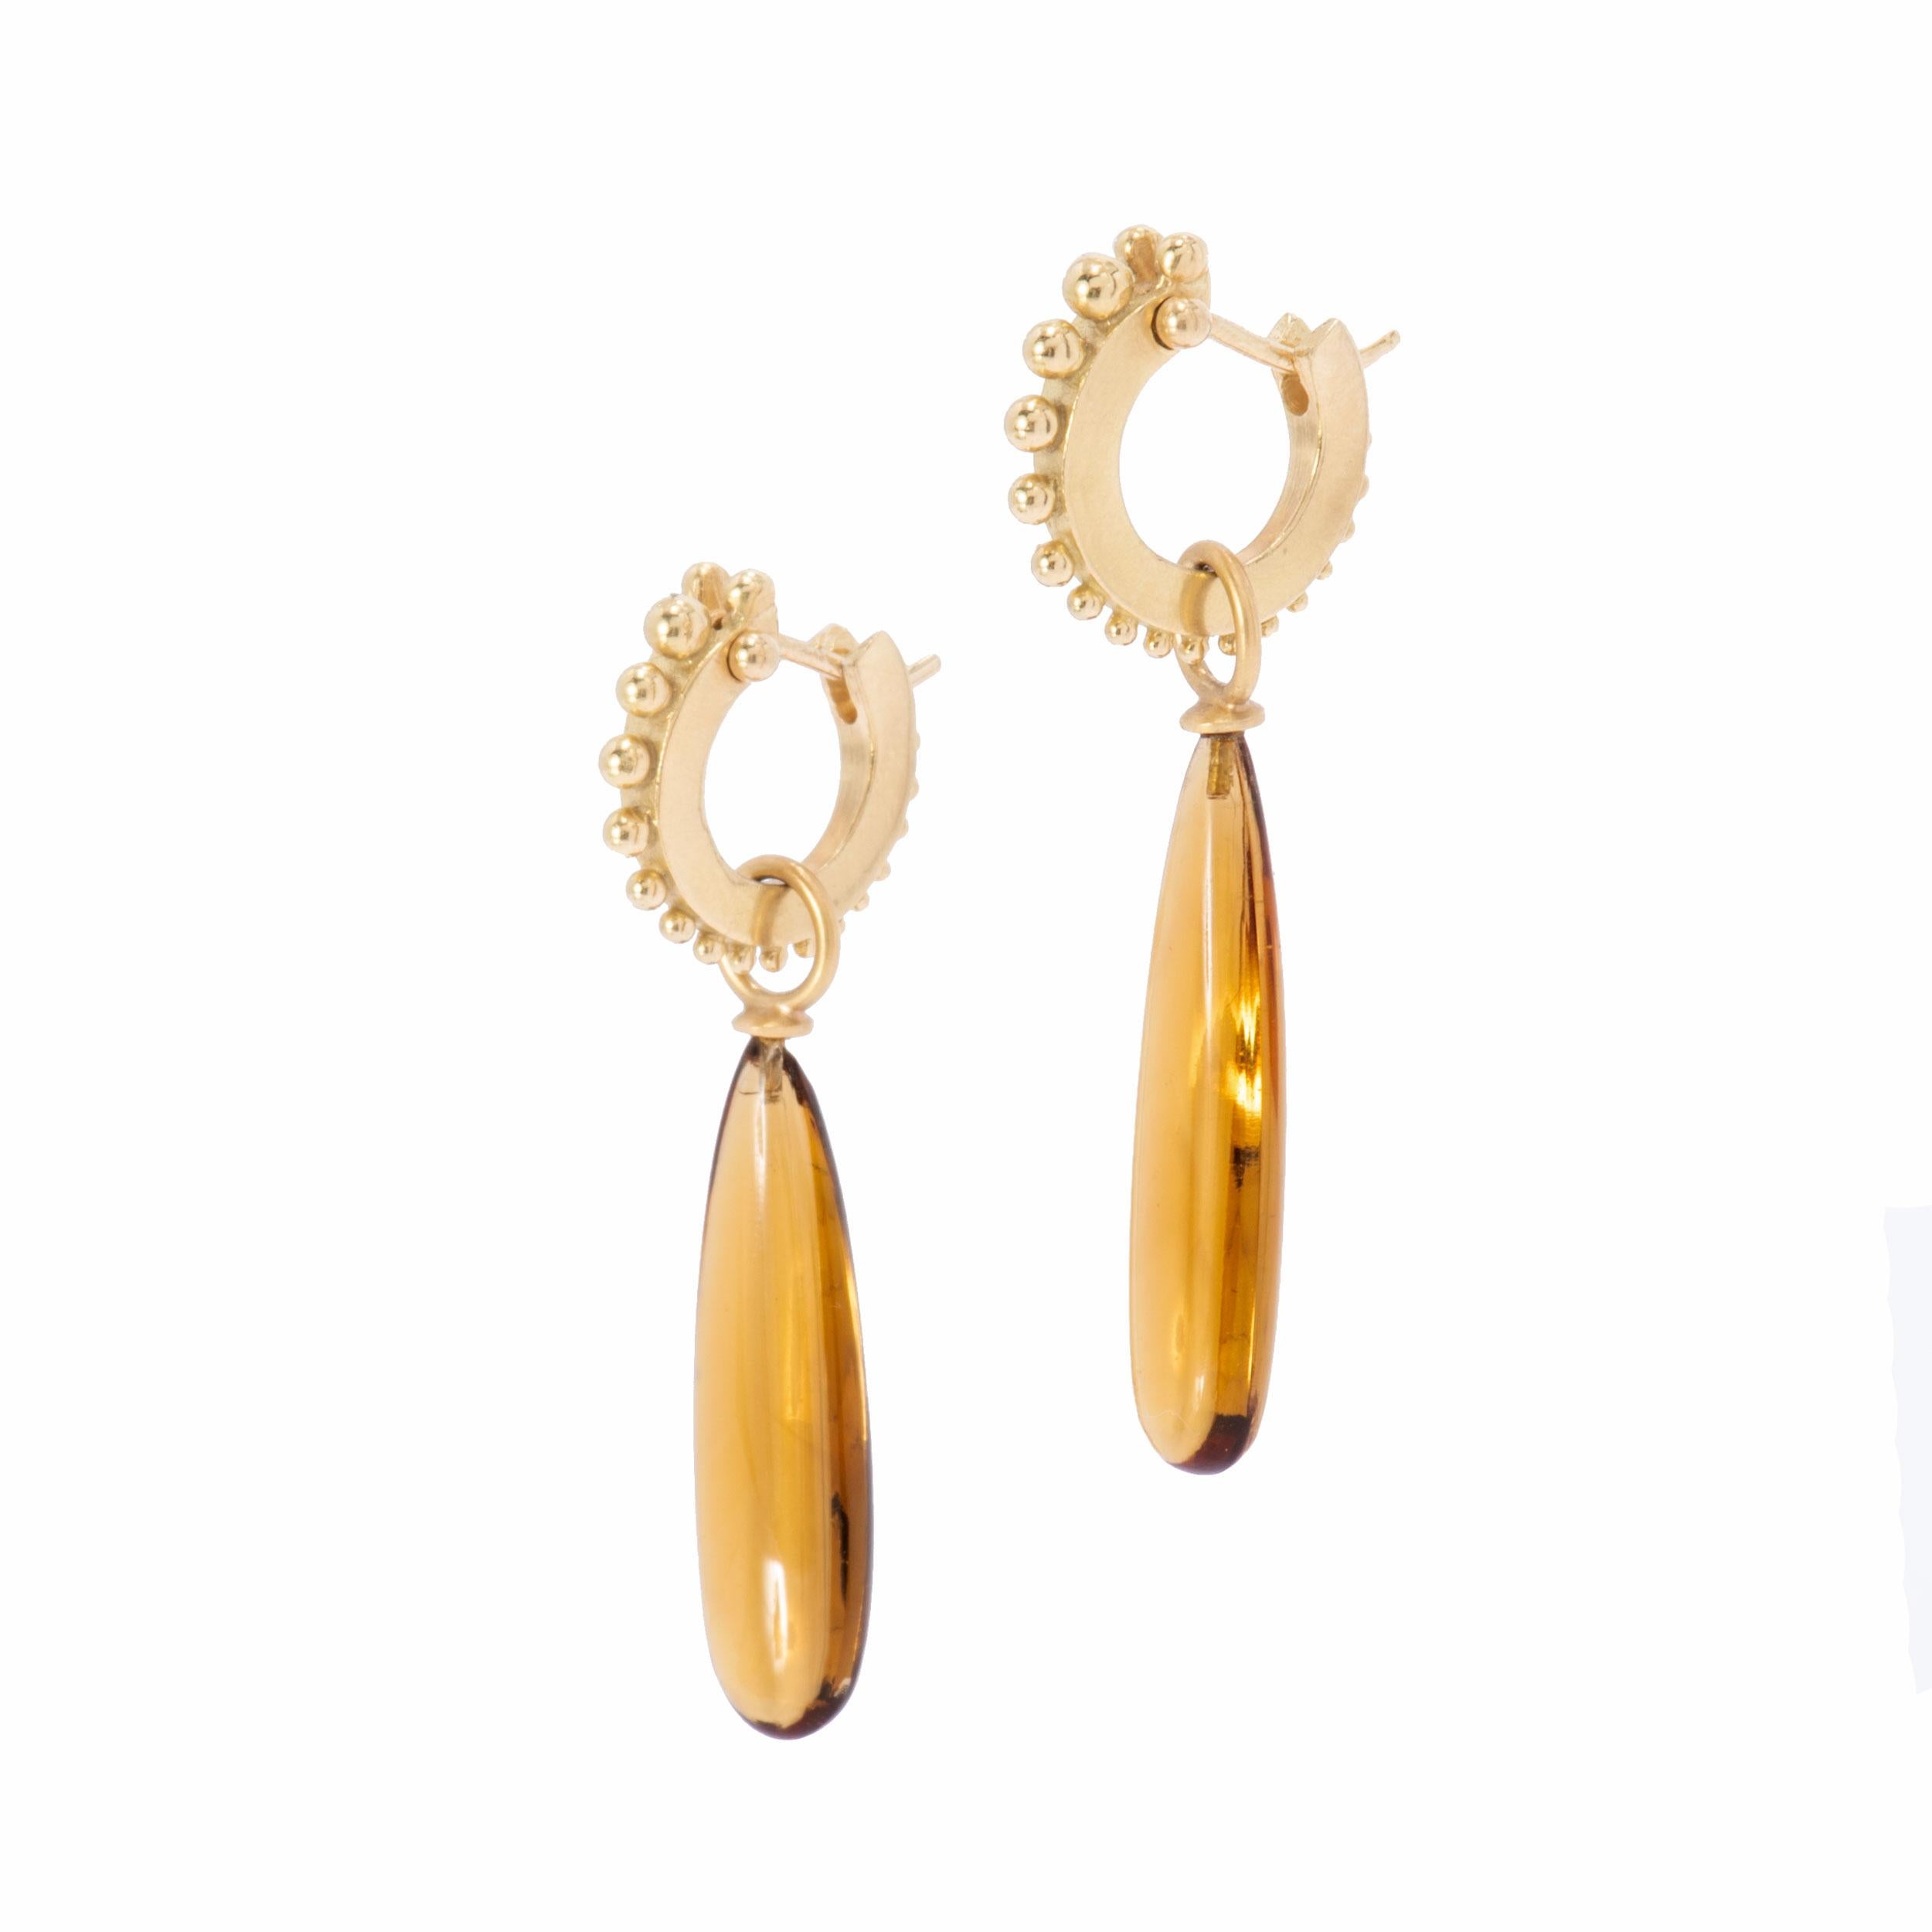 Congolese Citrine Wand Drop Earrings in 18k gold gleam with honey golden light. Fitted with caps and bails in 18k gold and handcrafted in our studio, they hang from our narrow beaded hoops which click tightly shut for security. Congolese citrine